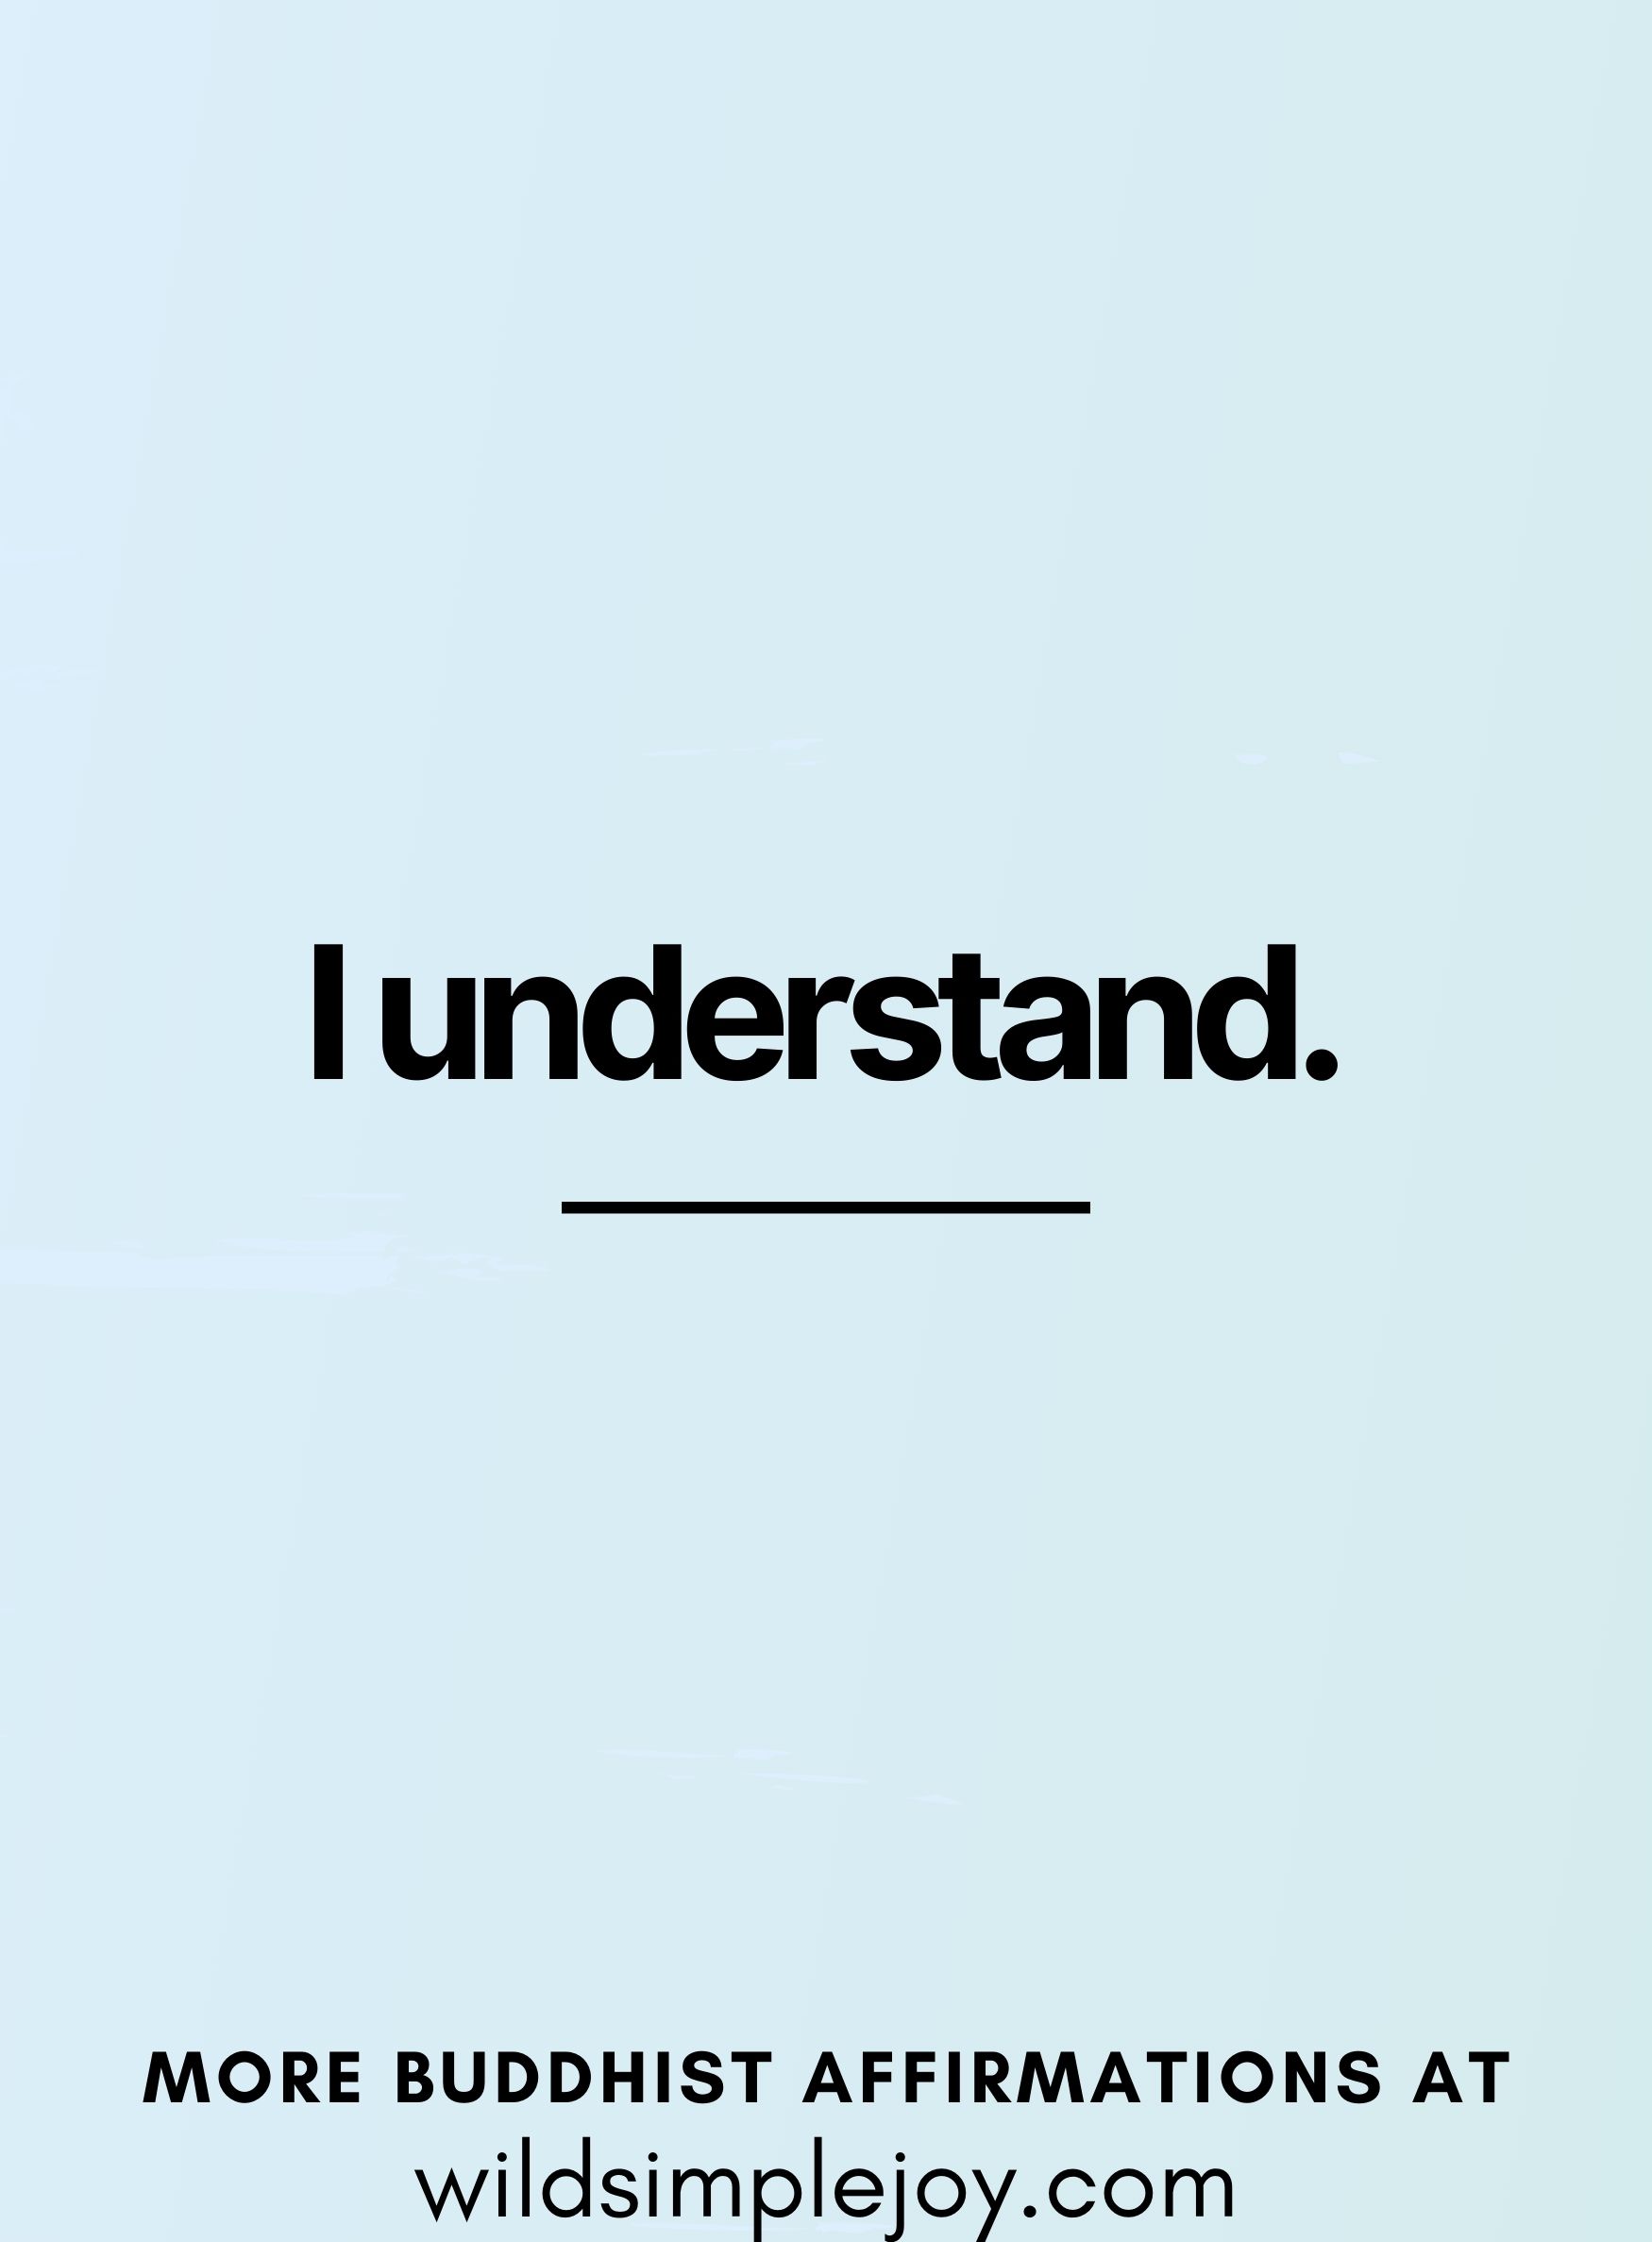 I understand. More Buddhist Affirmations at wildsimplejoy.com (on a teal background)